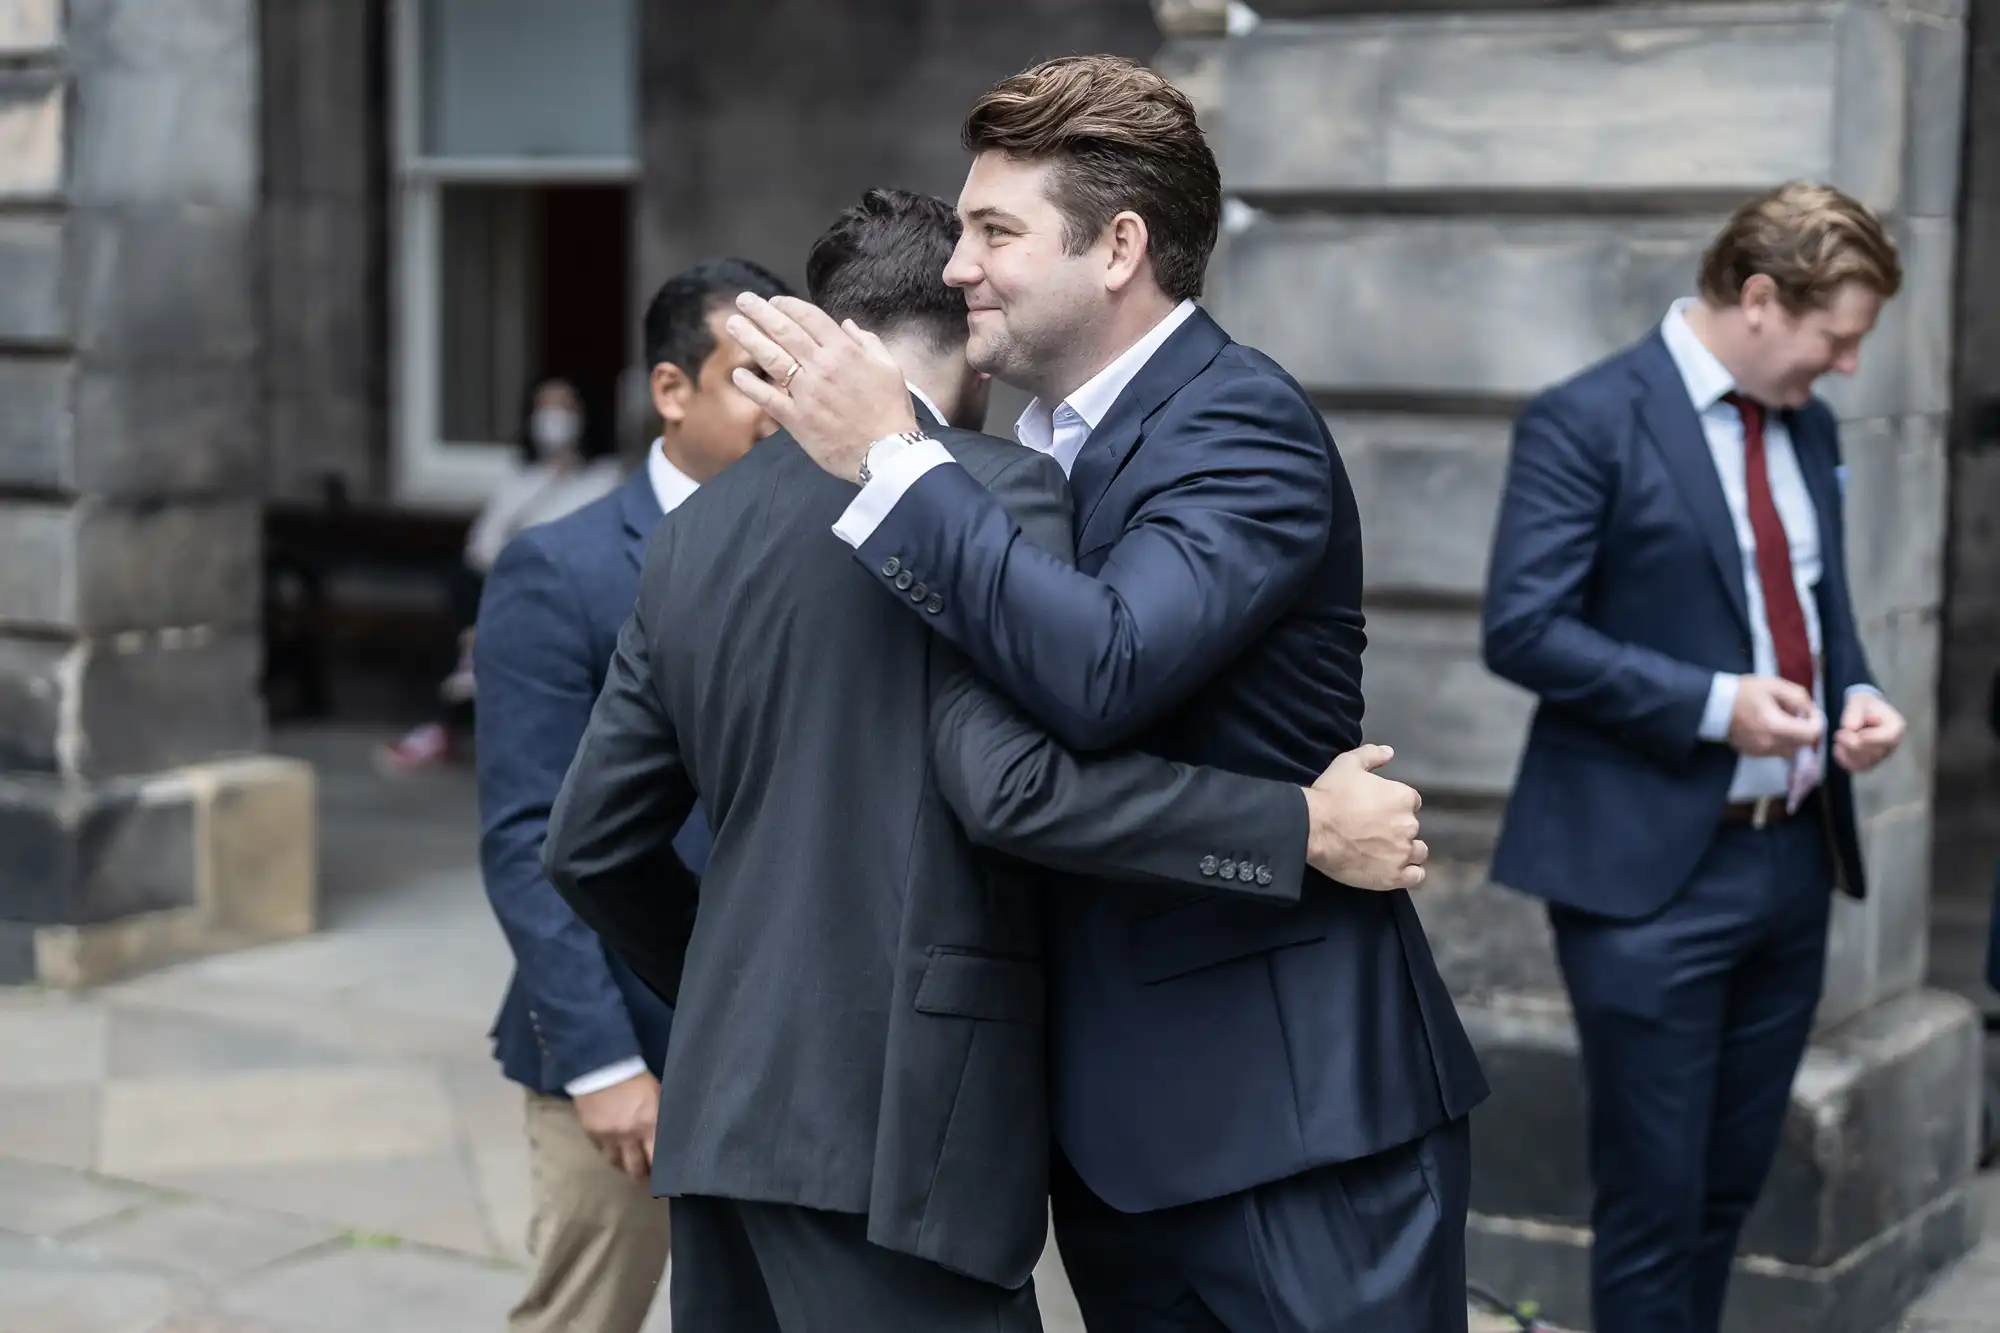 Two men in business suits embracing warmly on a city street, while another man in the background checks his phone.